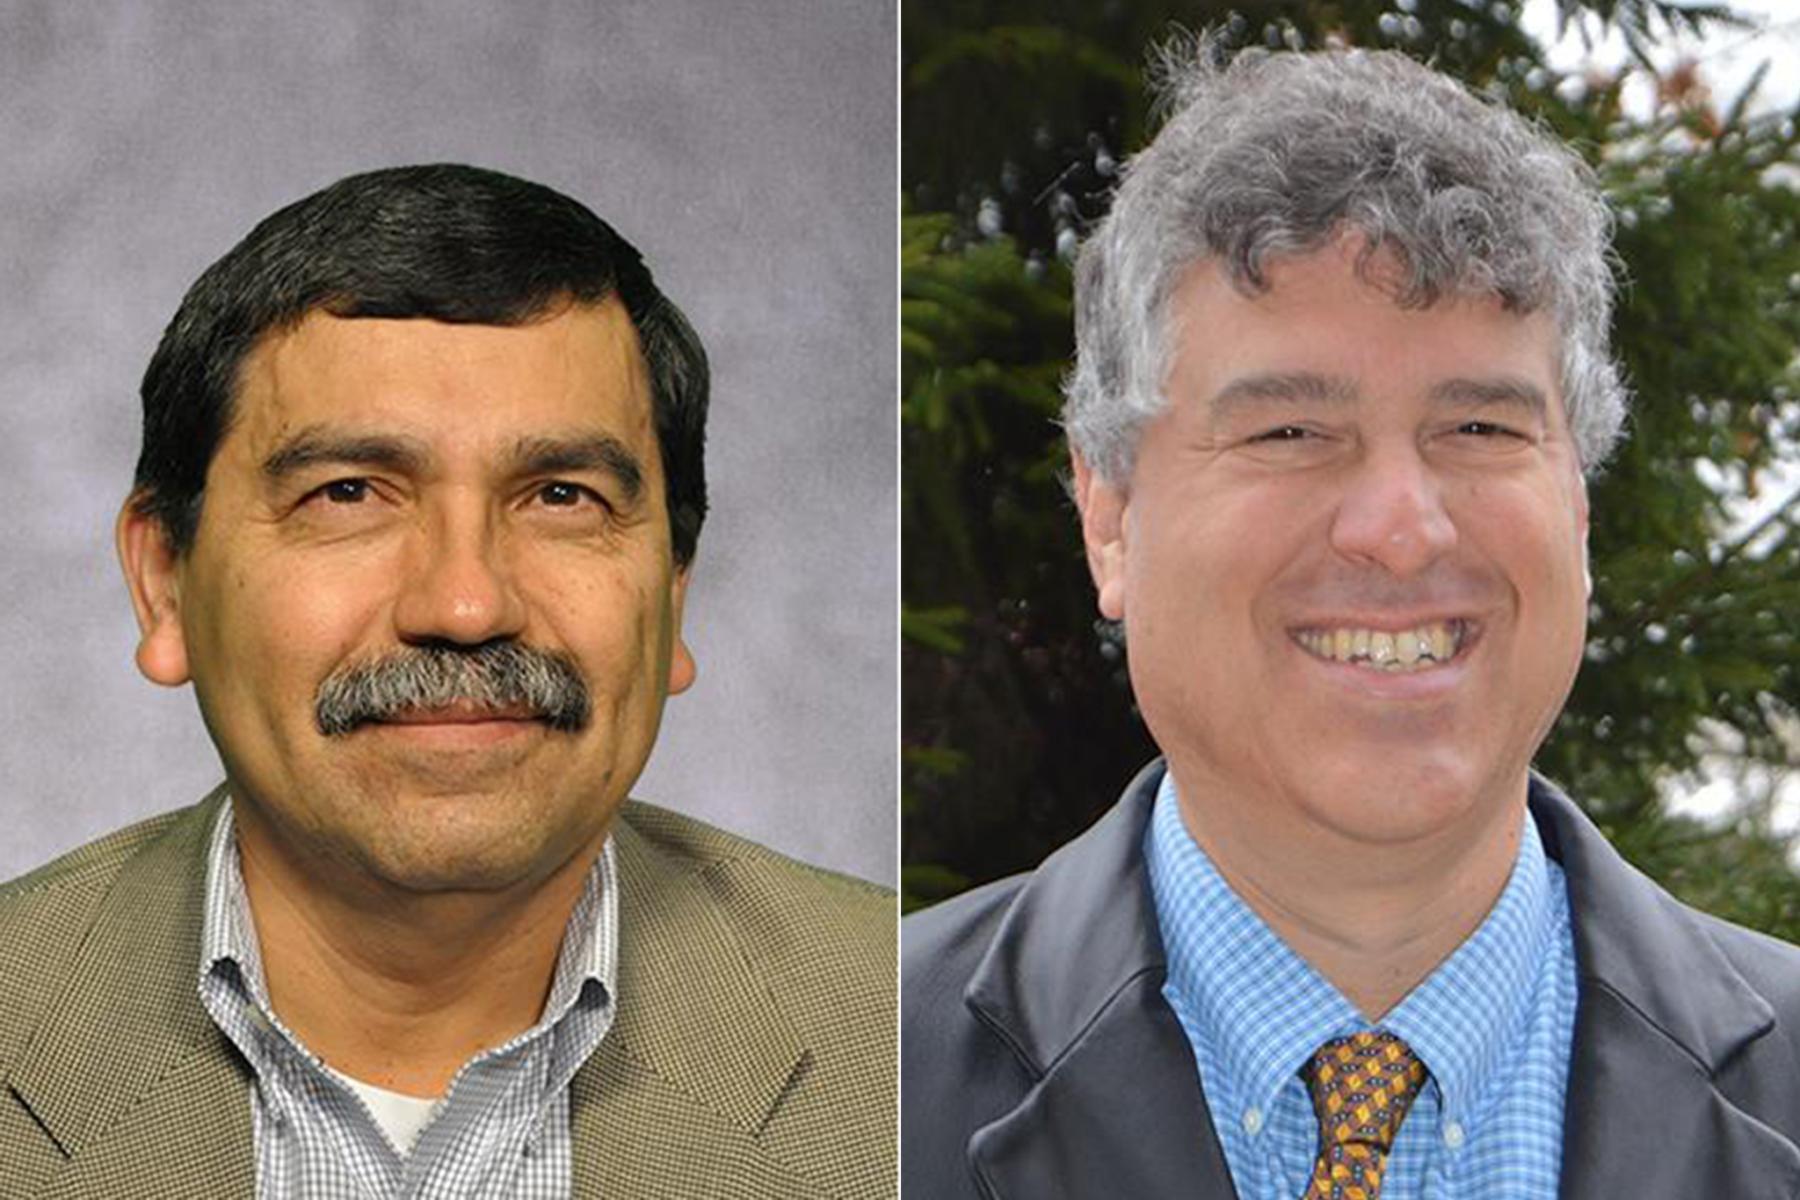 Jose Fuentes and Peter Wilf, Penn State professors